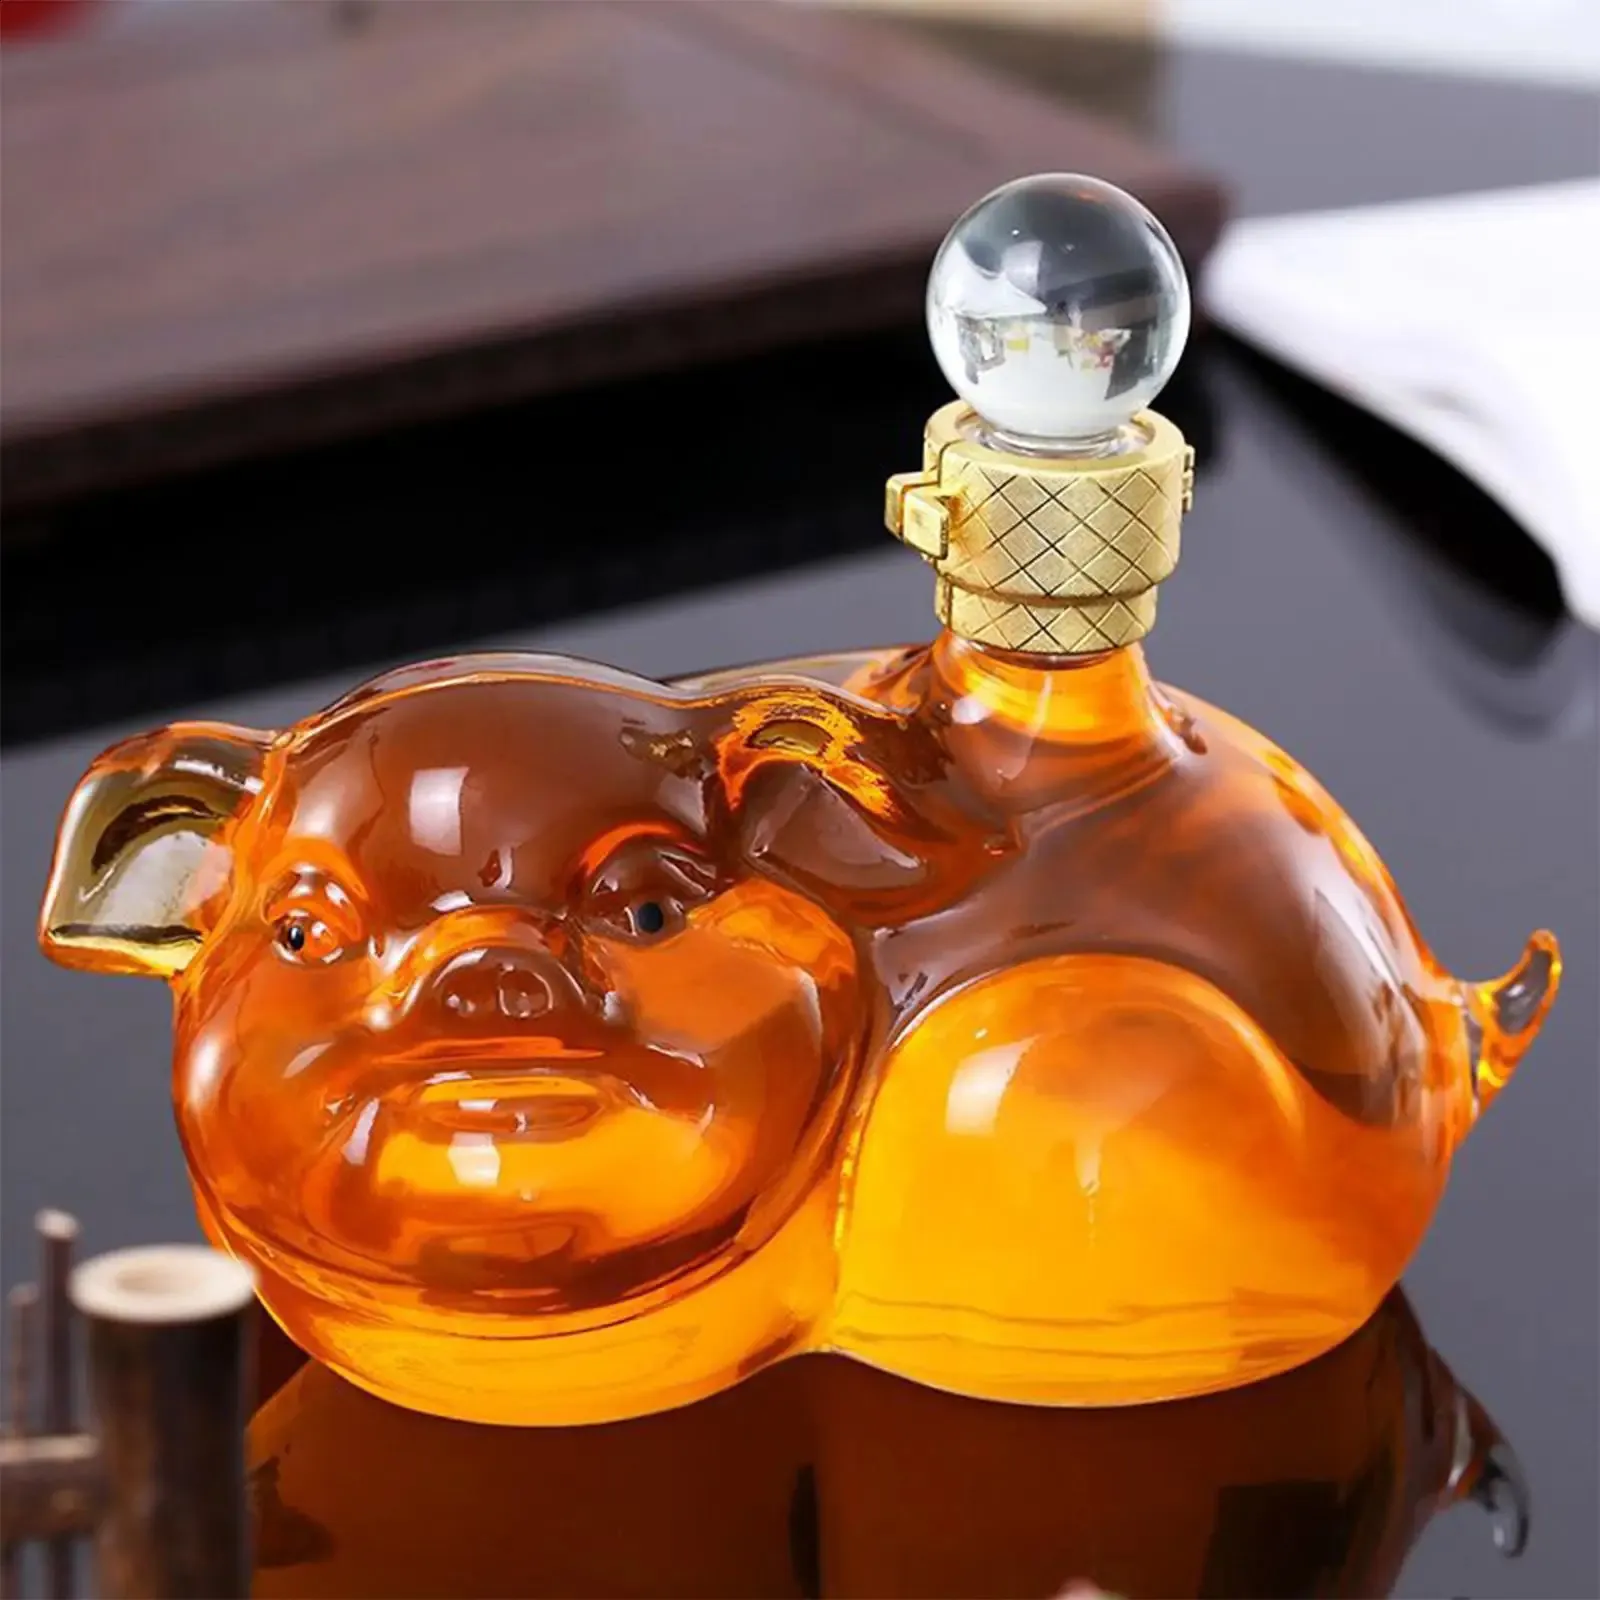 Glass Novelty Pig Shaped Whisky Decanter 1000ml Leads Free for Home Dining Liquor Bourbon Rum Tequila Tools Gifts Men 240420